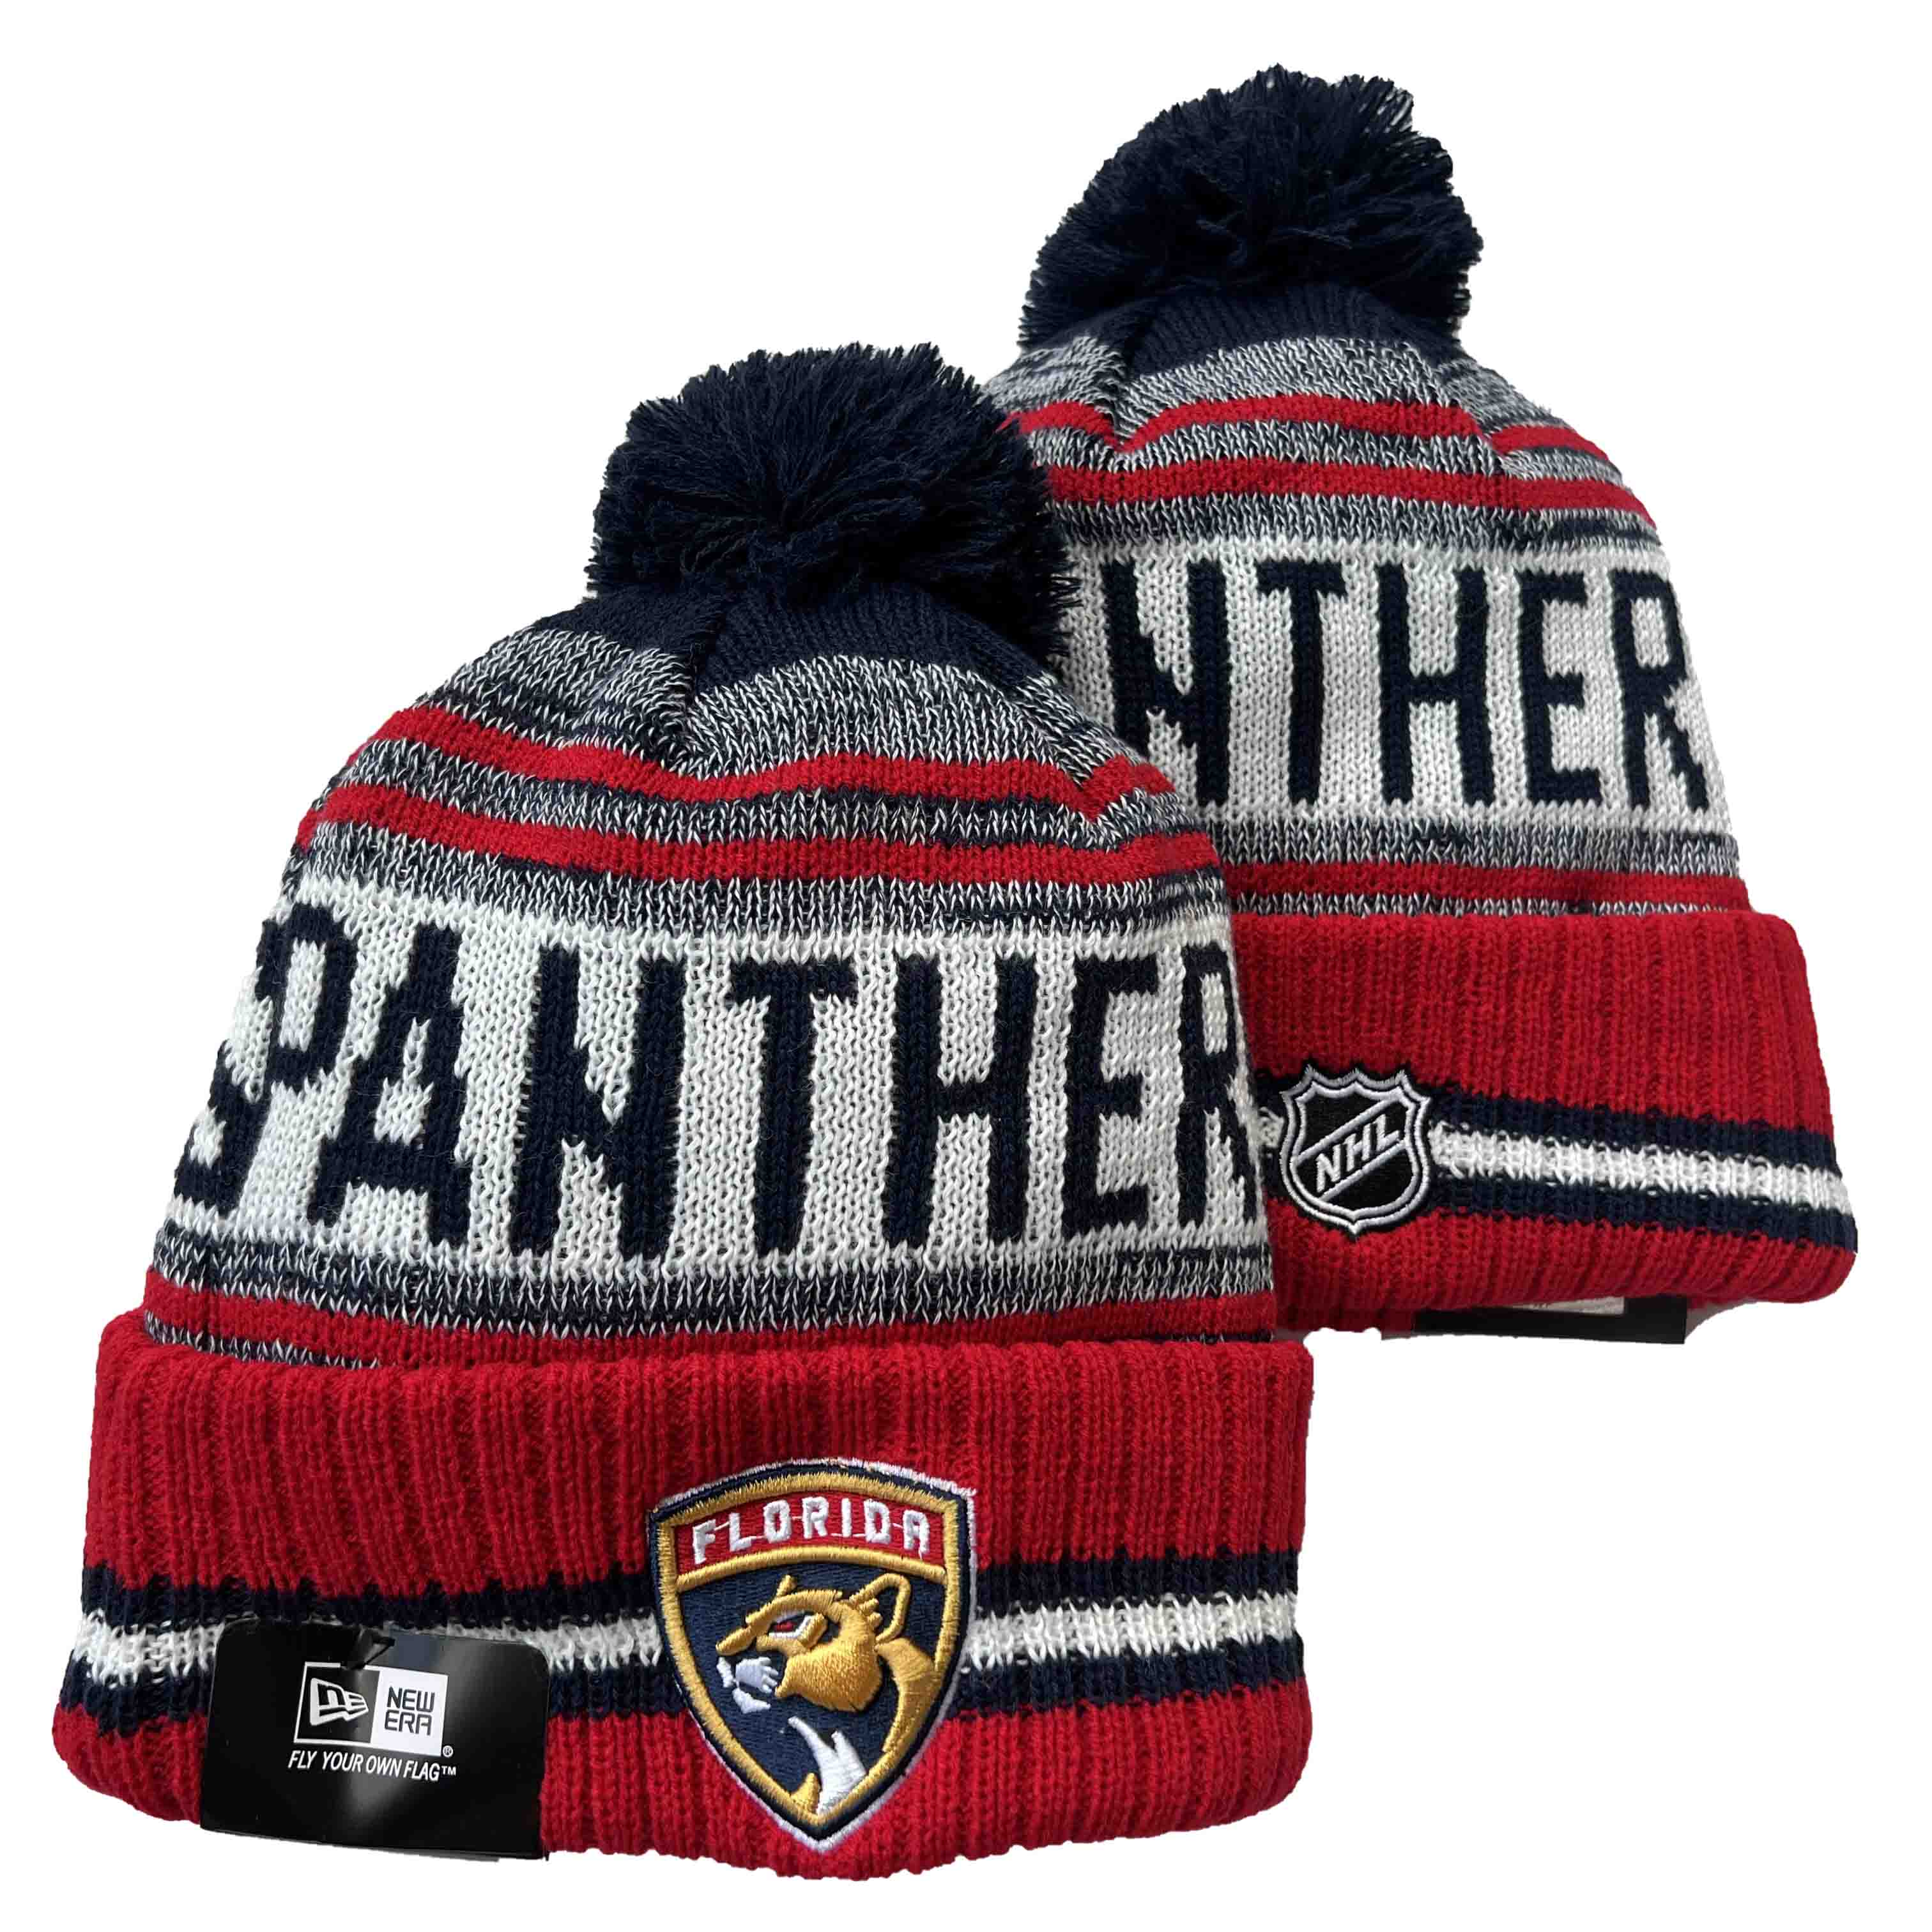 NHL Florida Panthers Beanies Knit Hats-YD1631